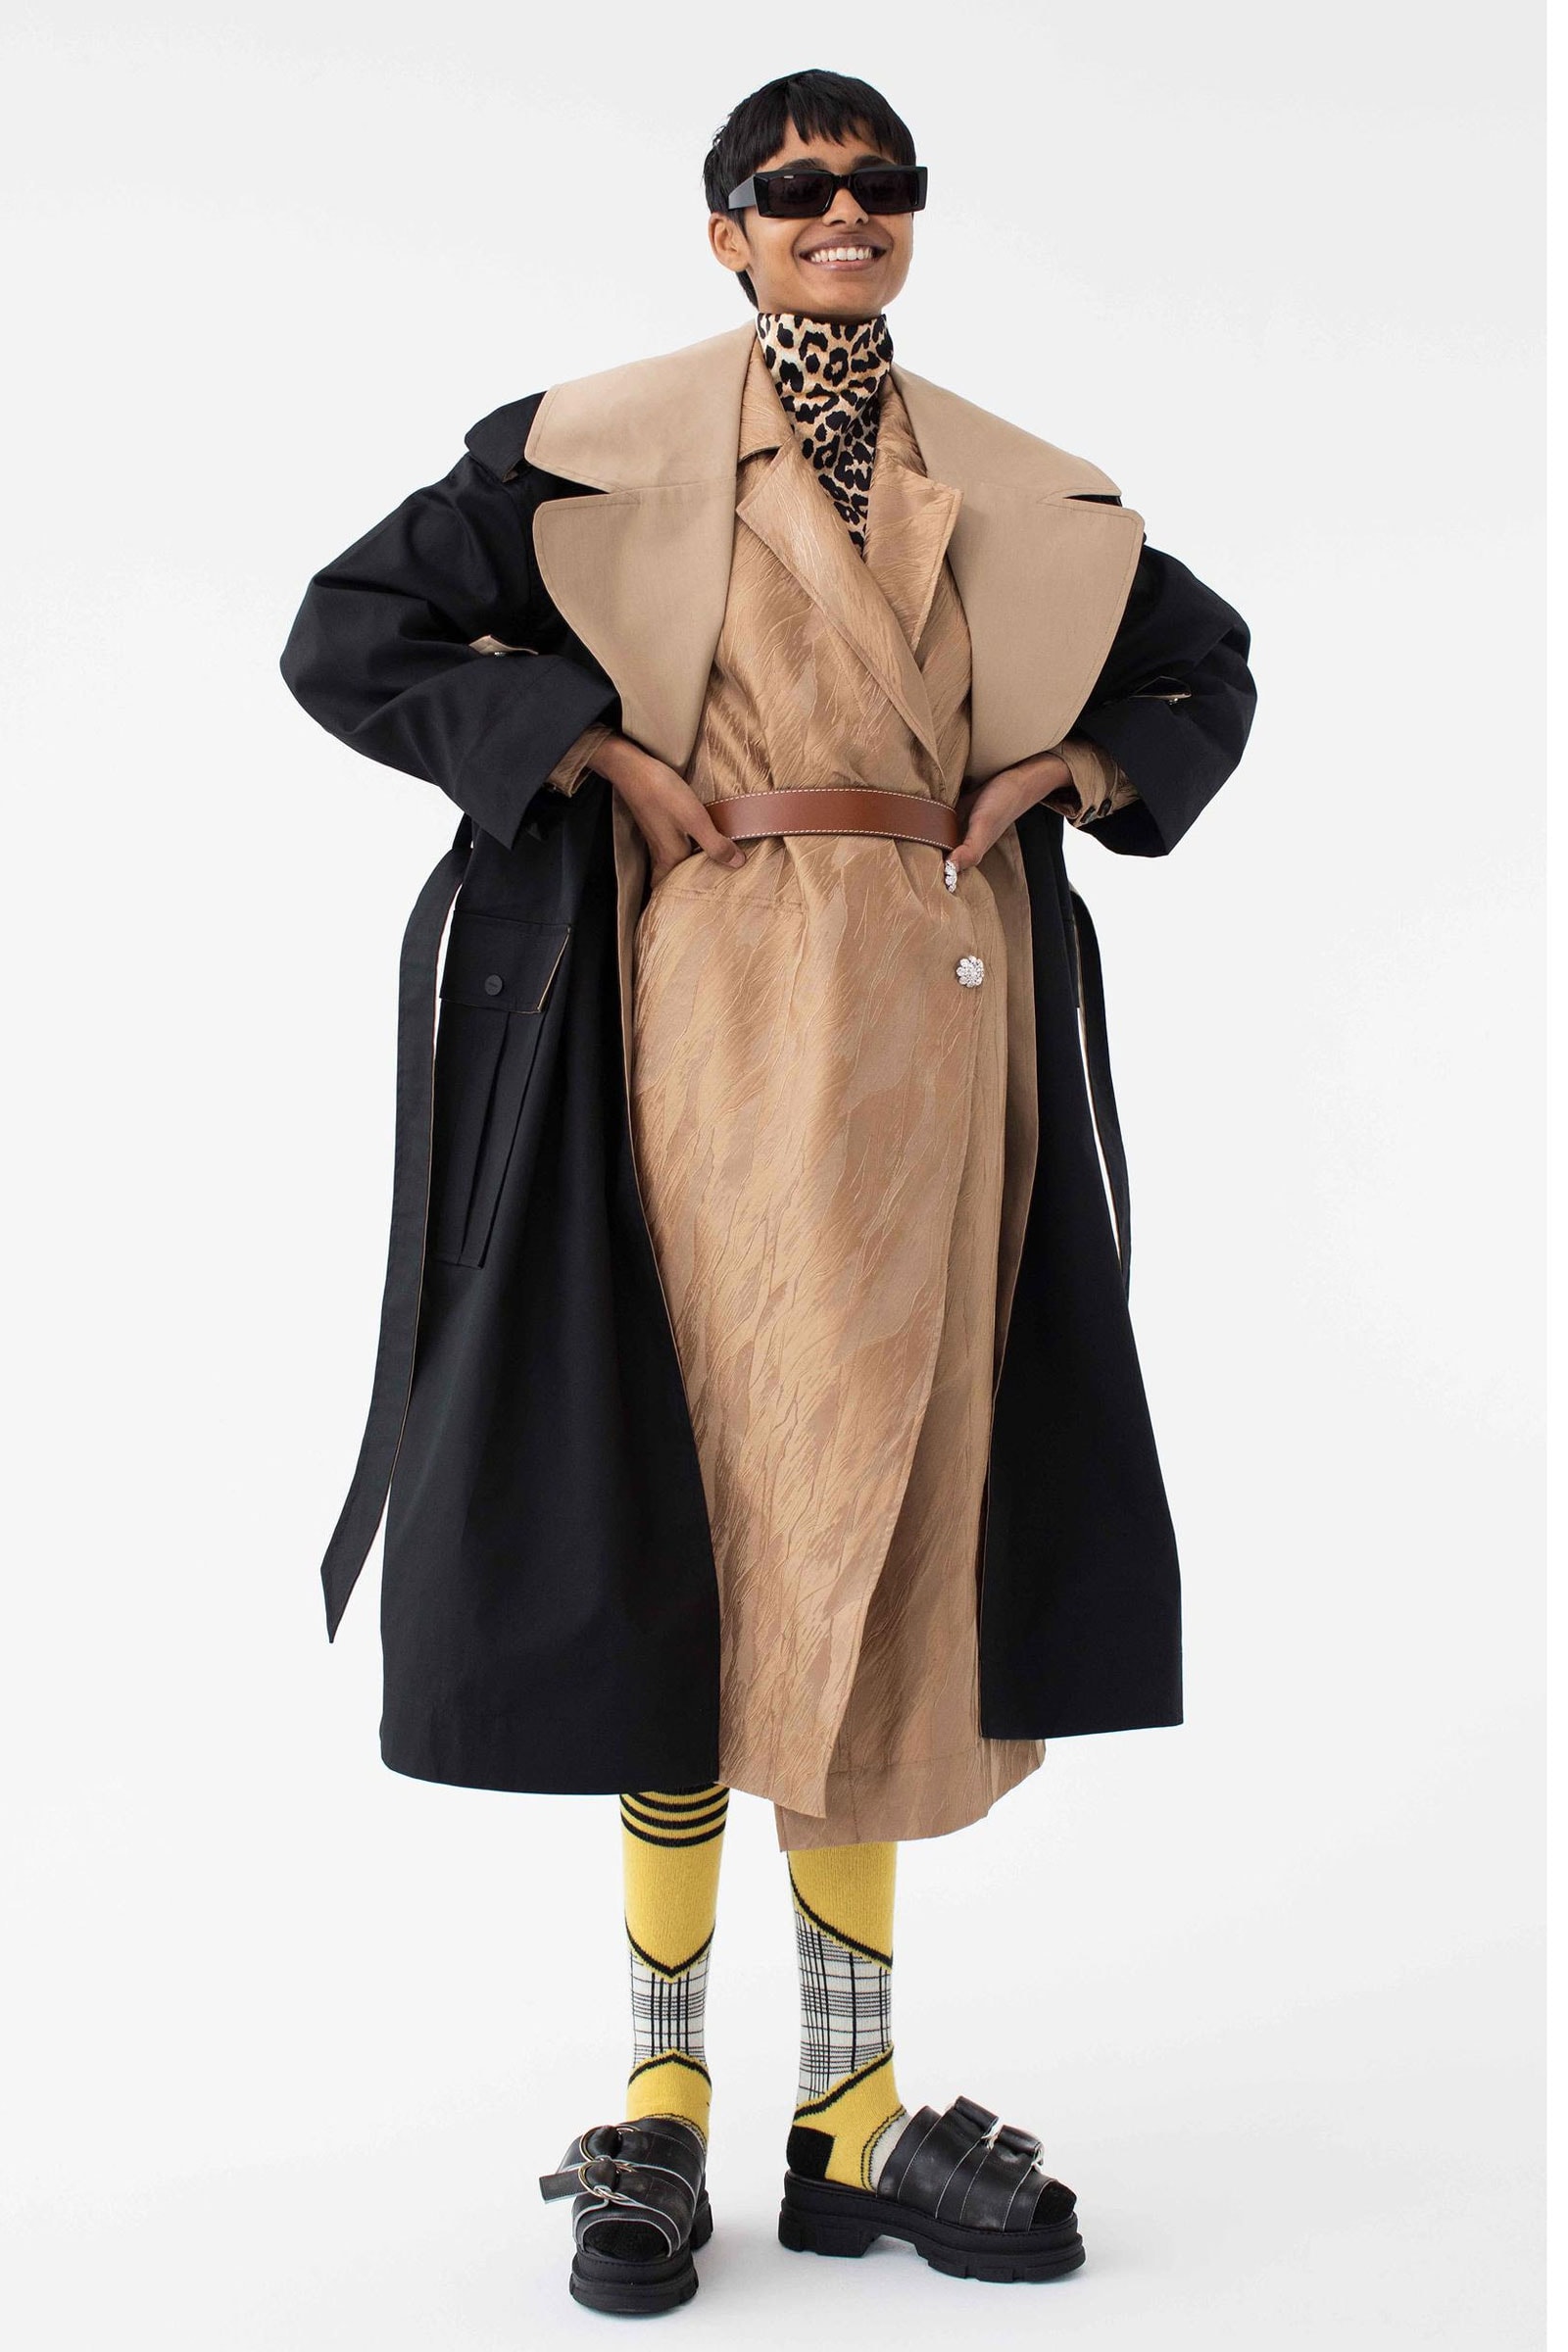 GANNI Pre-Spring 2020 Collection Lookbook Beige Khaki Tan Taupe Sand Trench Coat Jacket Silk Scarf Hat Beret 